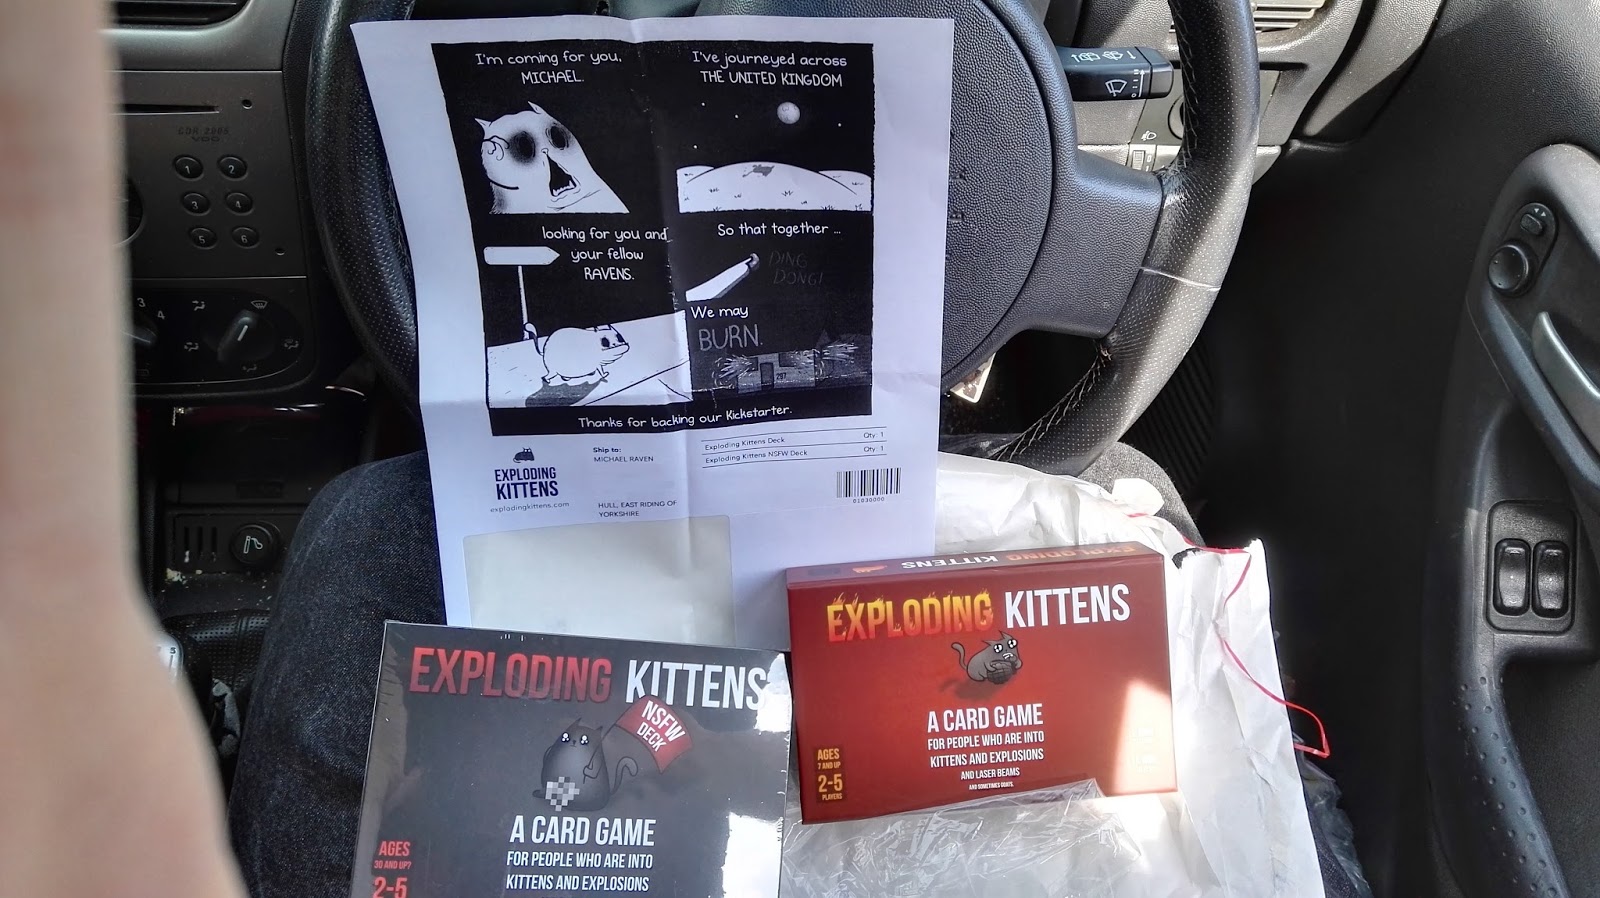 The Blog of Thog: Exploding Kittens is here